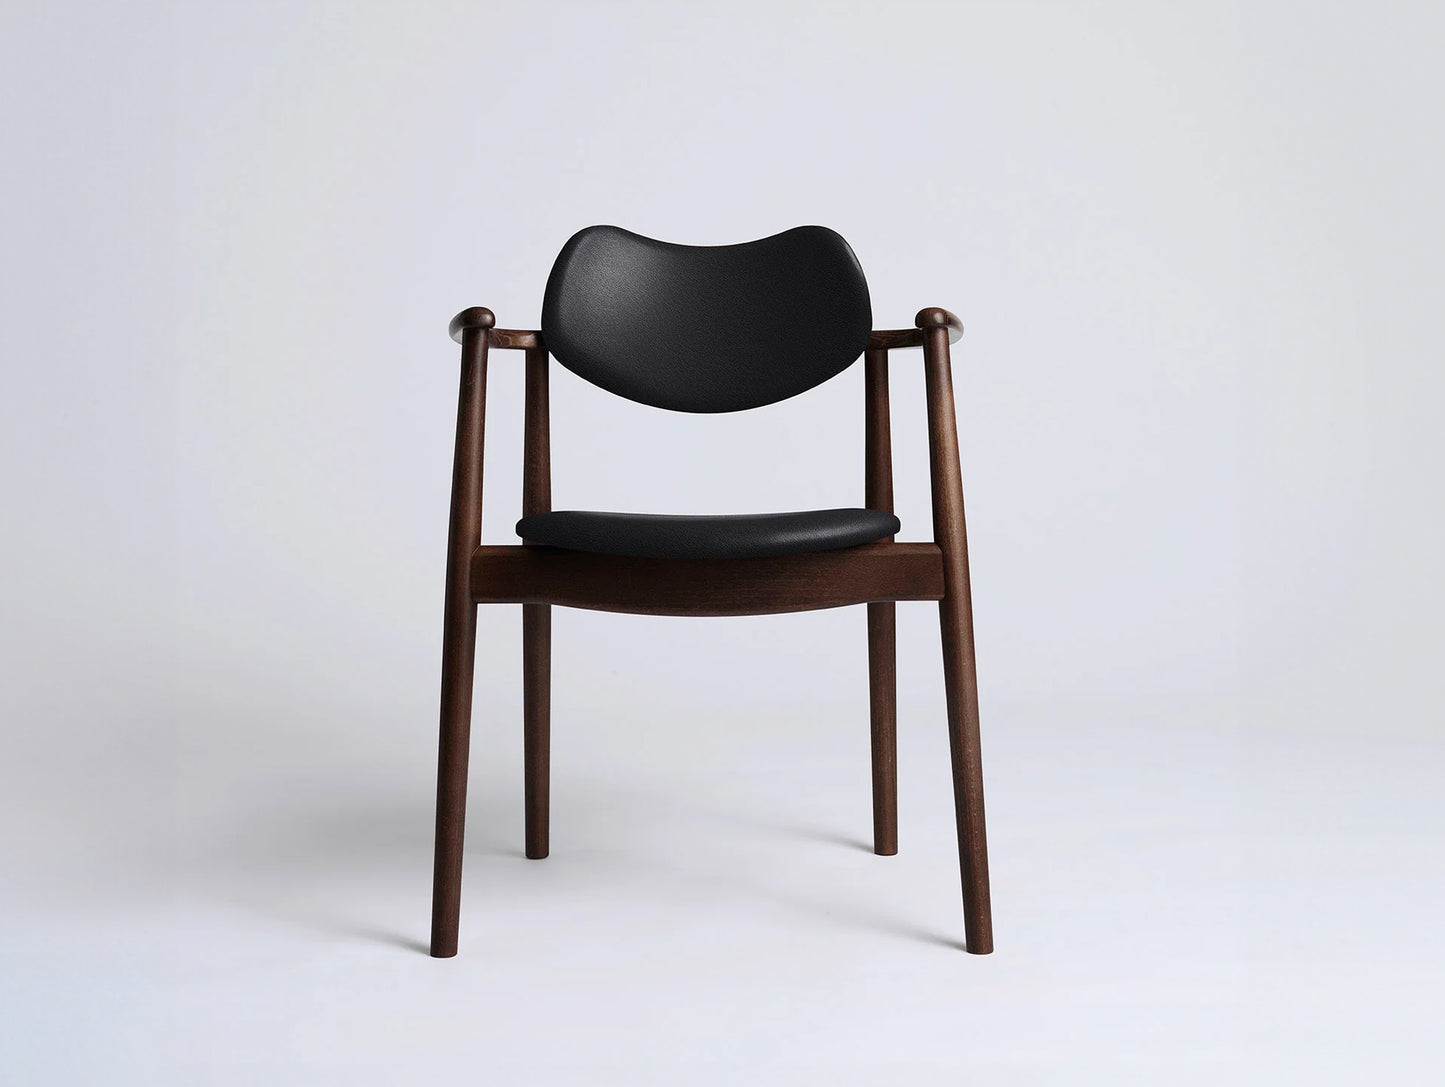 Regatta Chair Seat and Back Upholstered by Ro Collection - Walnut Stained Beech / Standard Sierra Black Leather